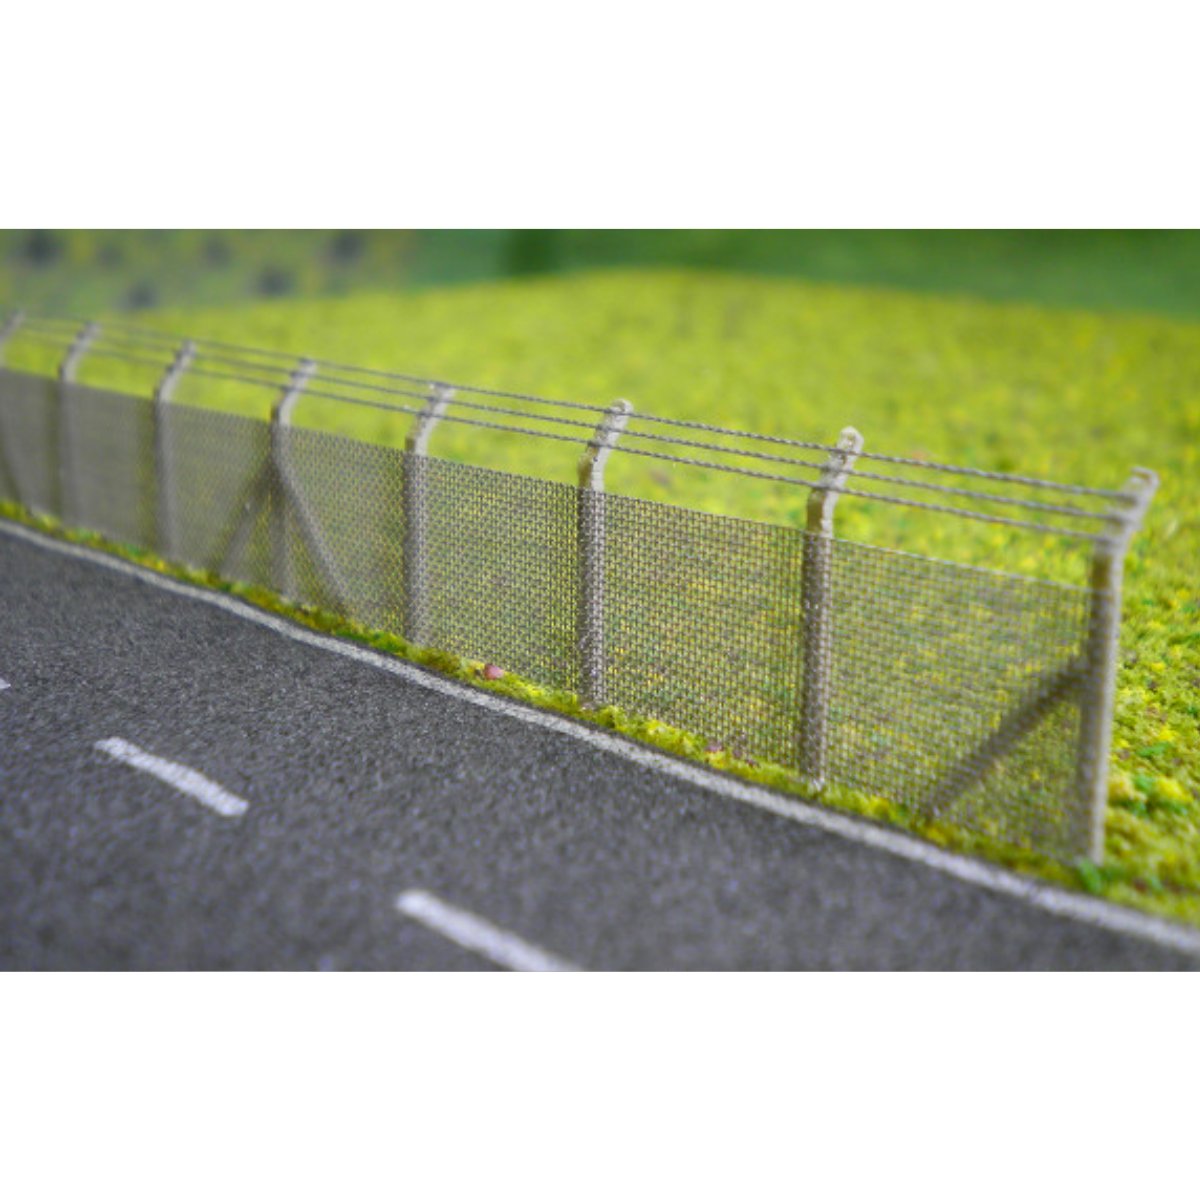 Ancorton Models NF8 Security Fencing Kit with Barbed Wire Top (N Gauge) - Phillips Hobbies